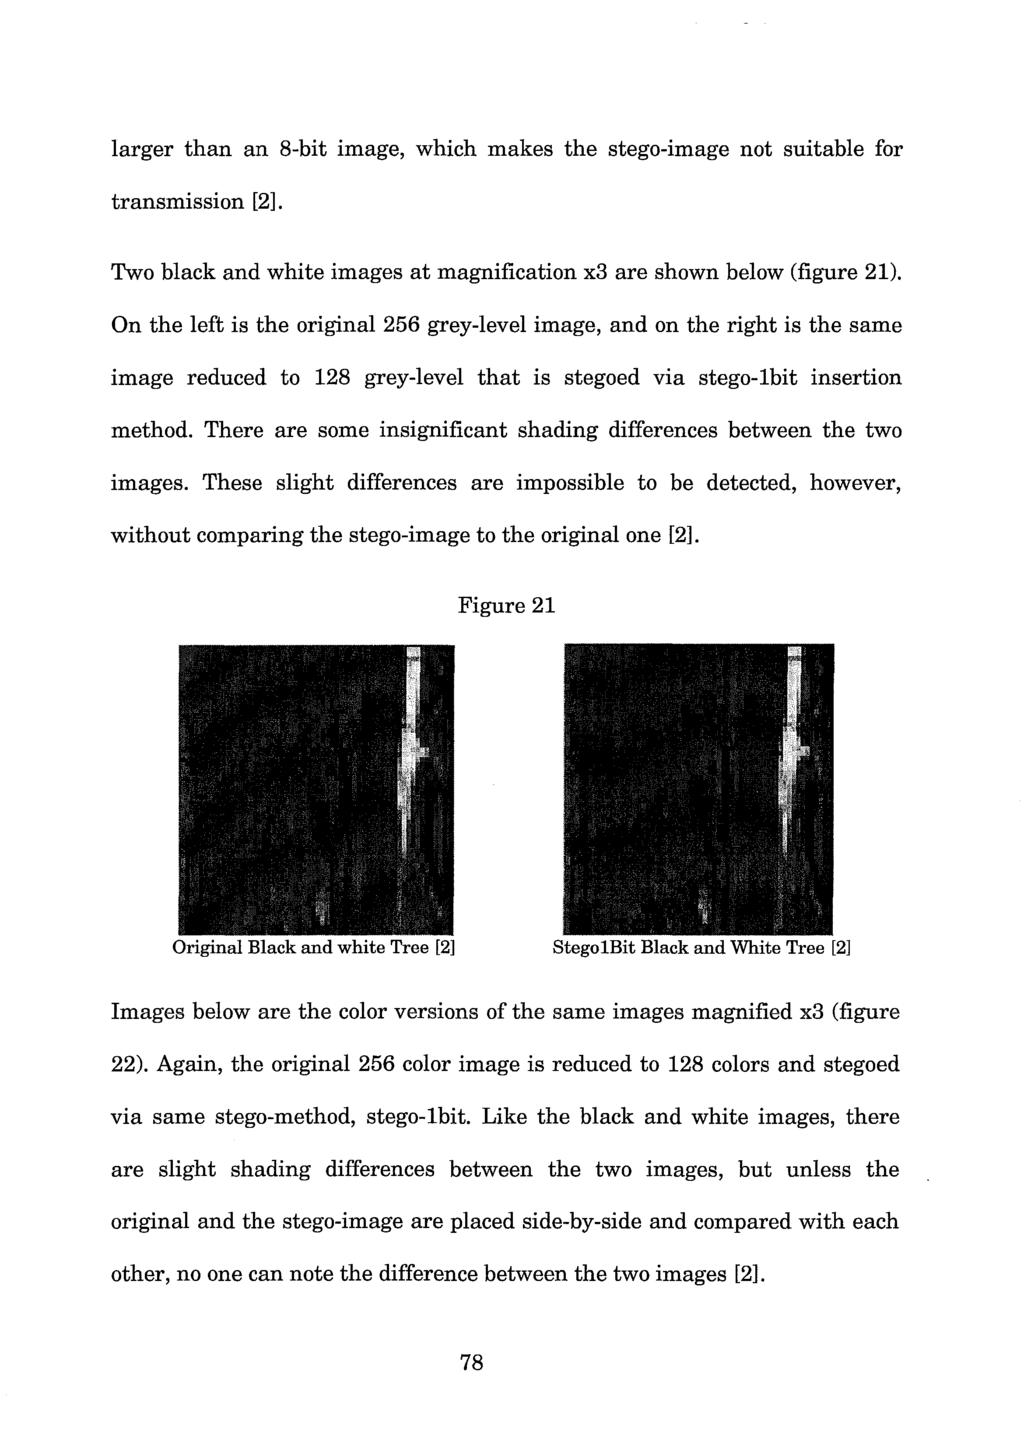 larger than an 8-bit image, which makes the stego-image not suitable for transmission [2]. Two black and white images at magnification x3 are shown below (figure 21).